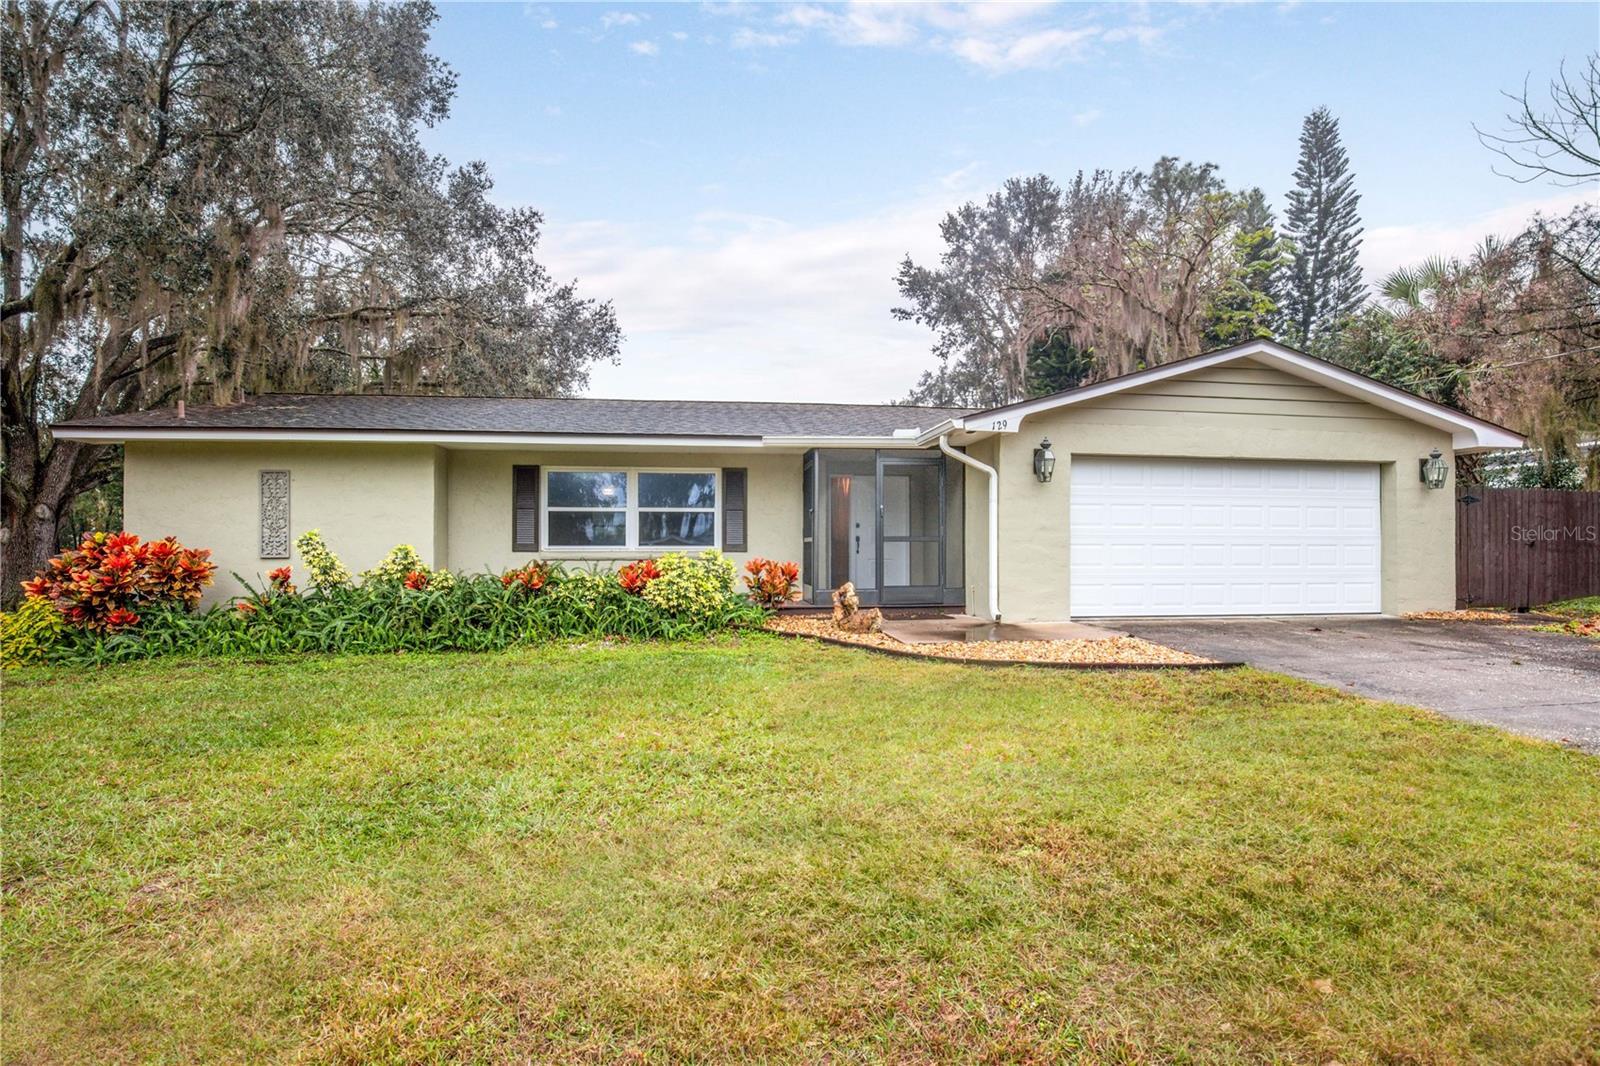 Photo one of 129 E Laurel Ave Howey In The Hills FL 34737 | MLS O6172650